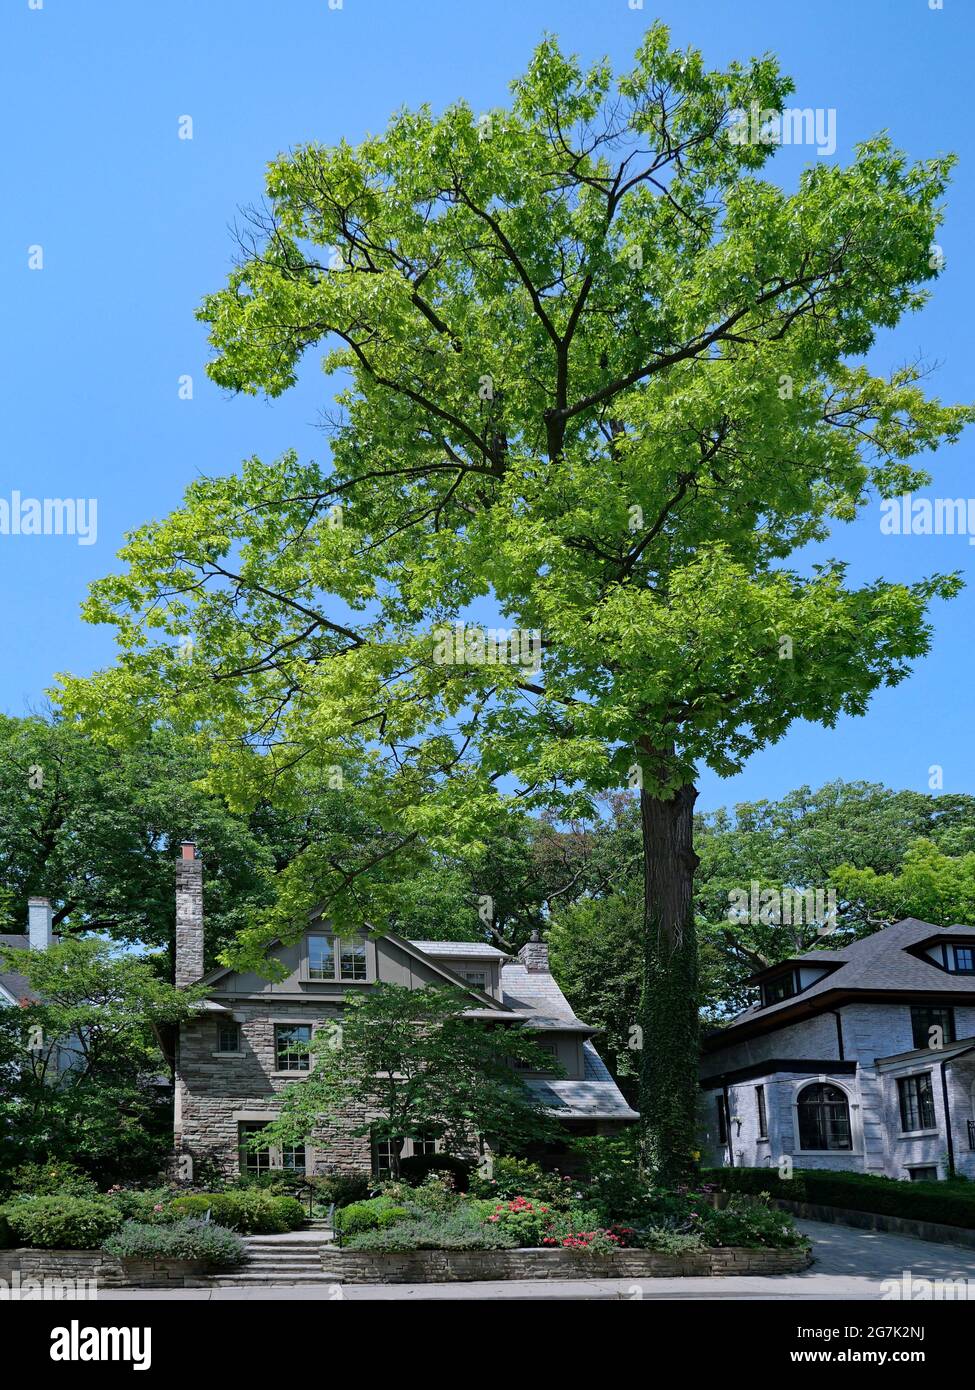 Residential street with very tall oak tree Stock Photo